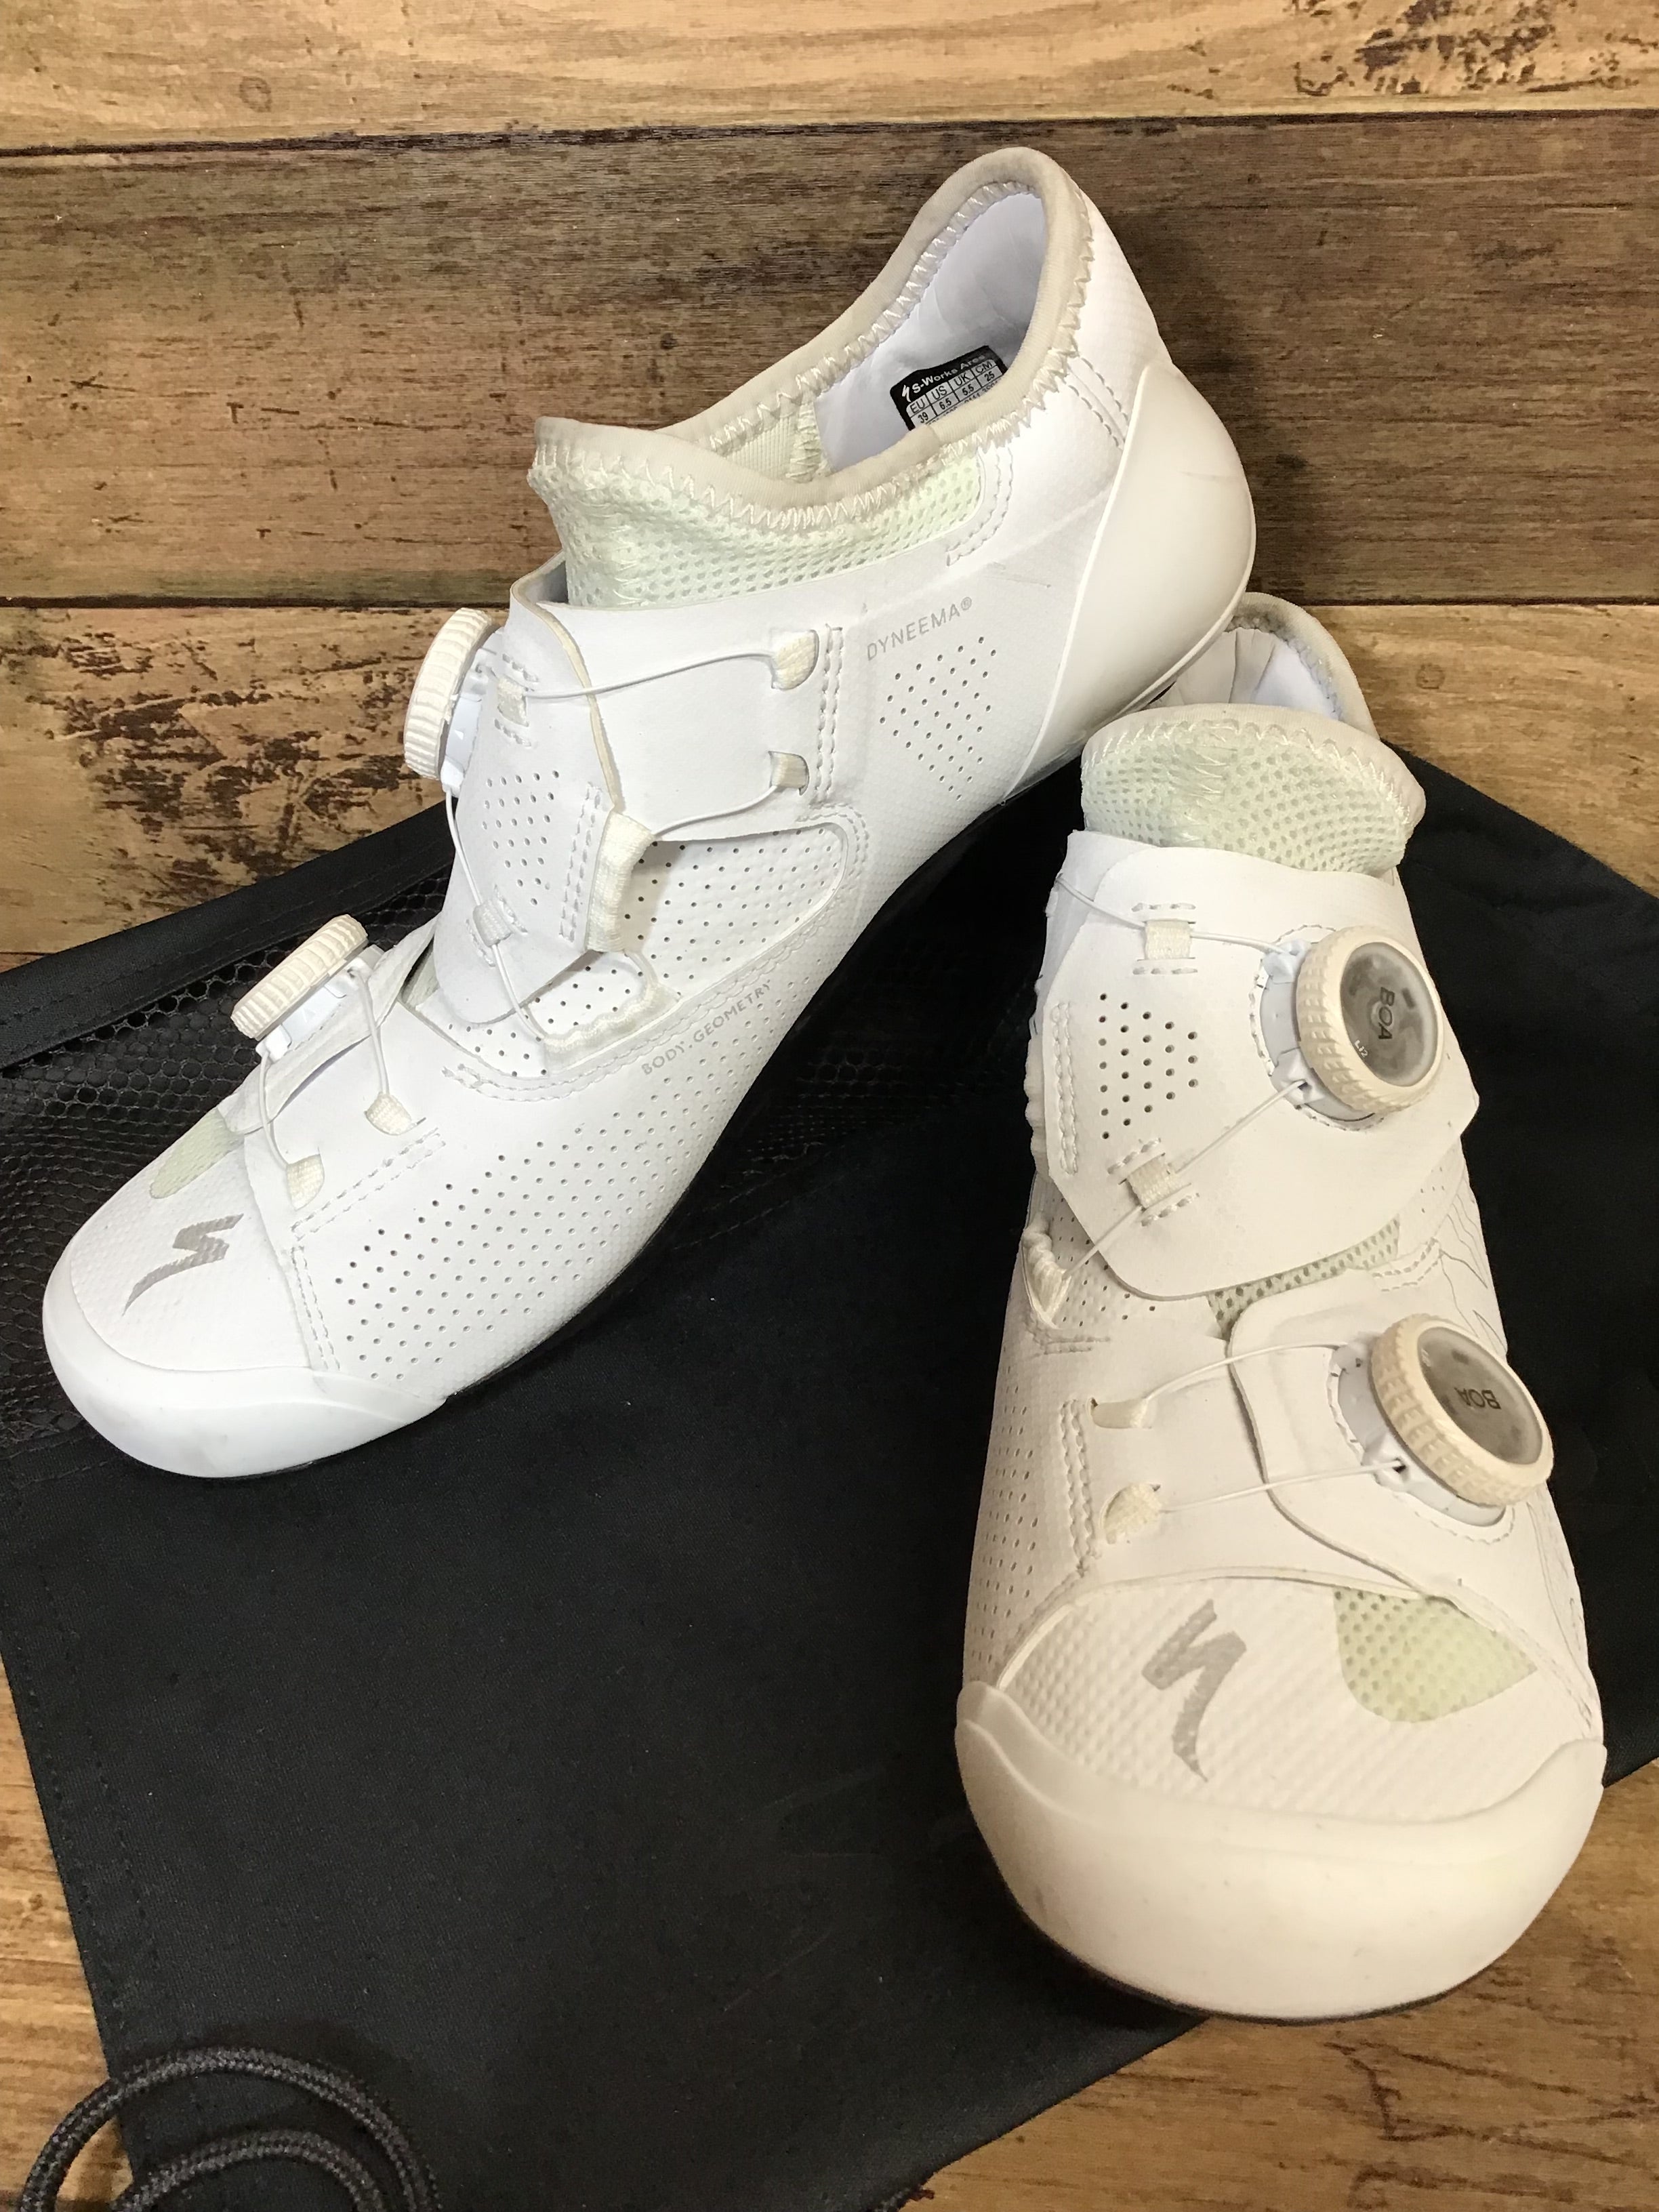 HK181 スペシャライズド SPECIALIZED S-WORKS ARES RD SHOE